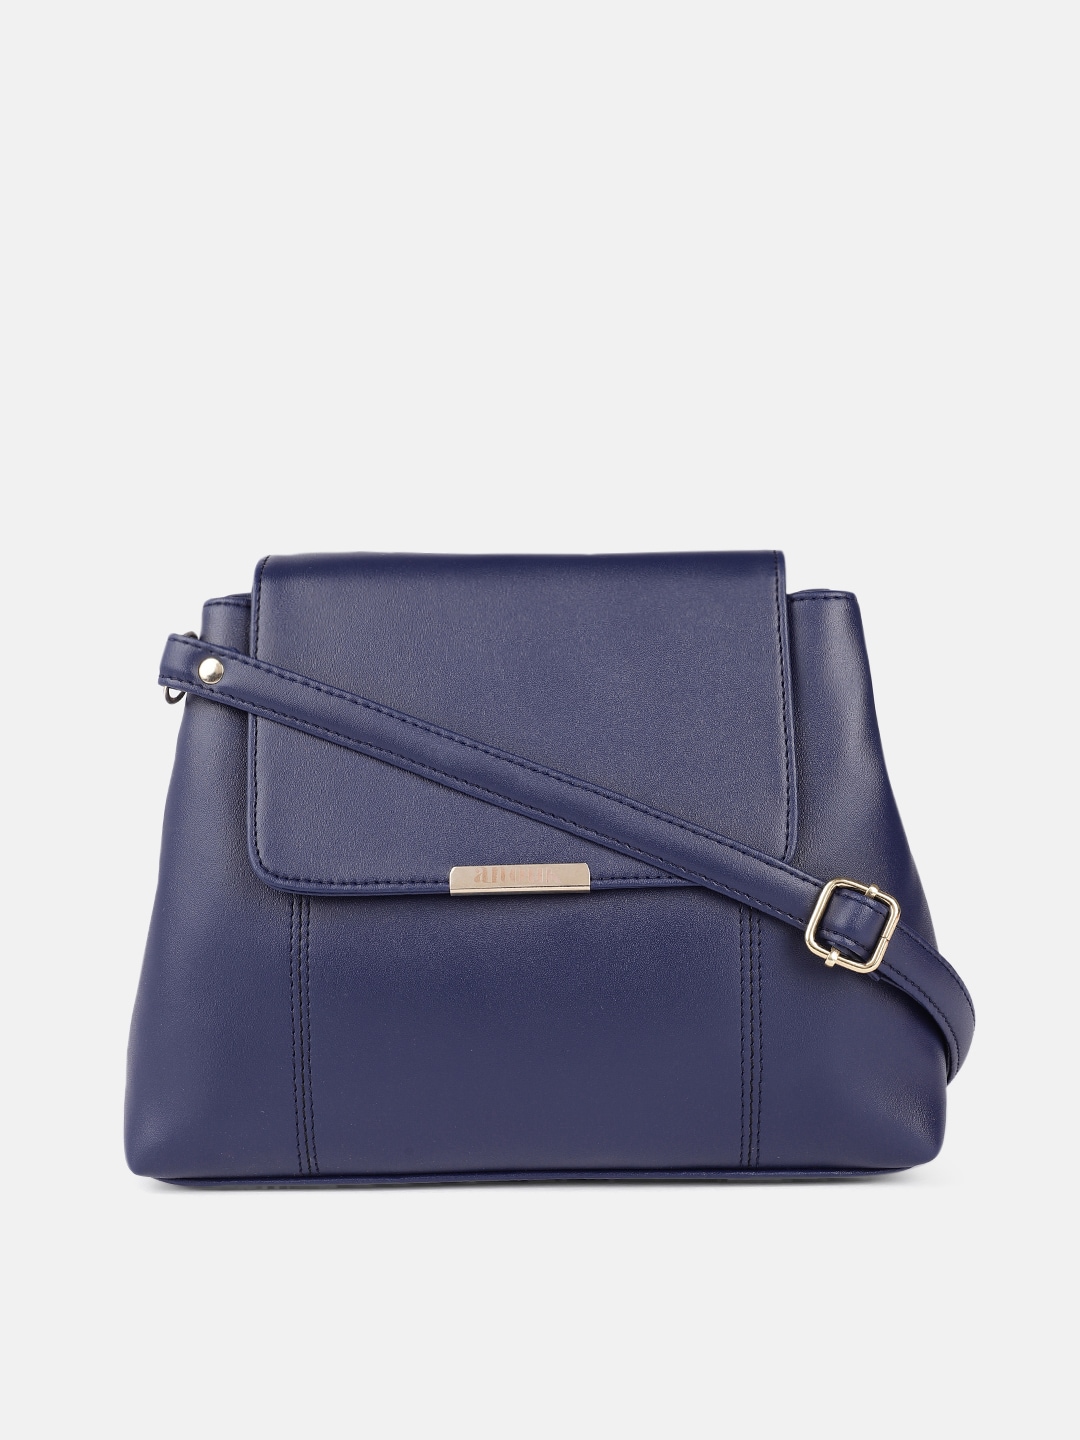 Anouk Navy Blue Structured Sling Bag Price in India